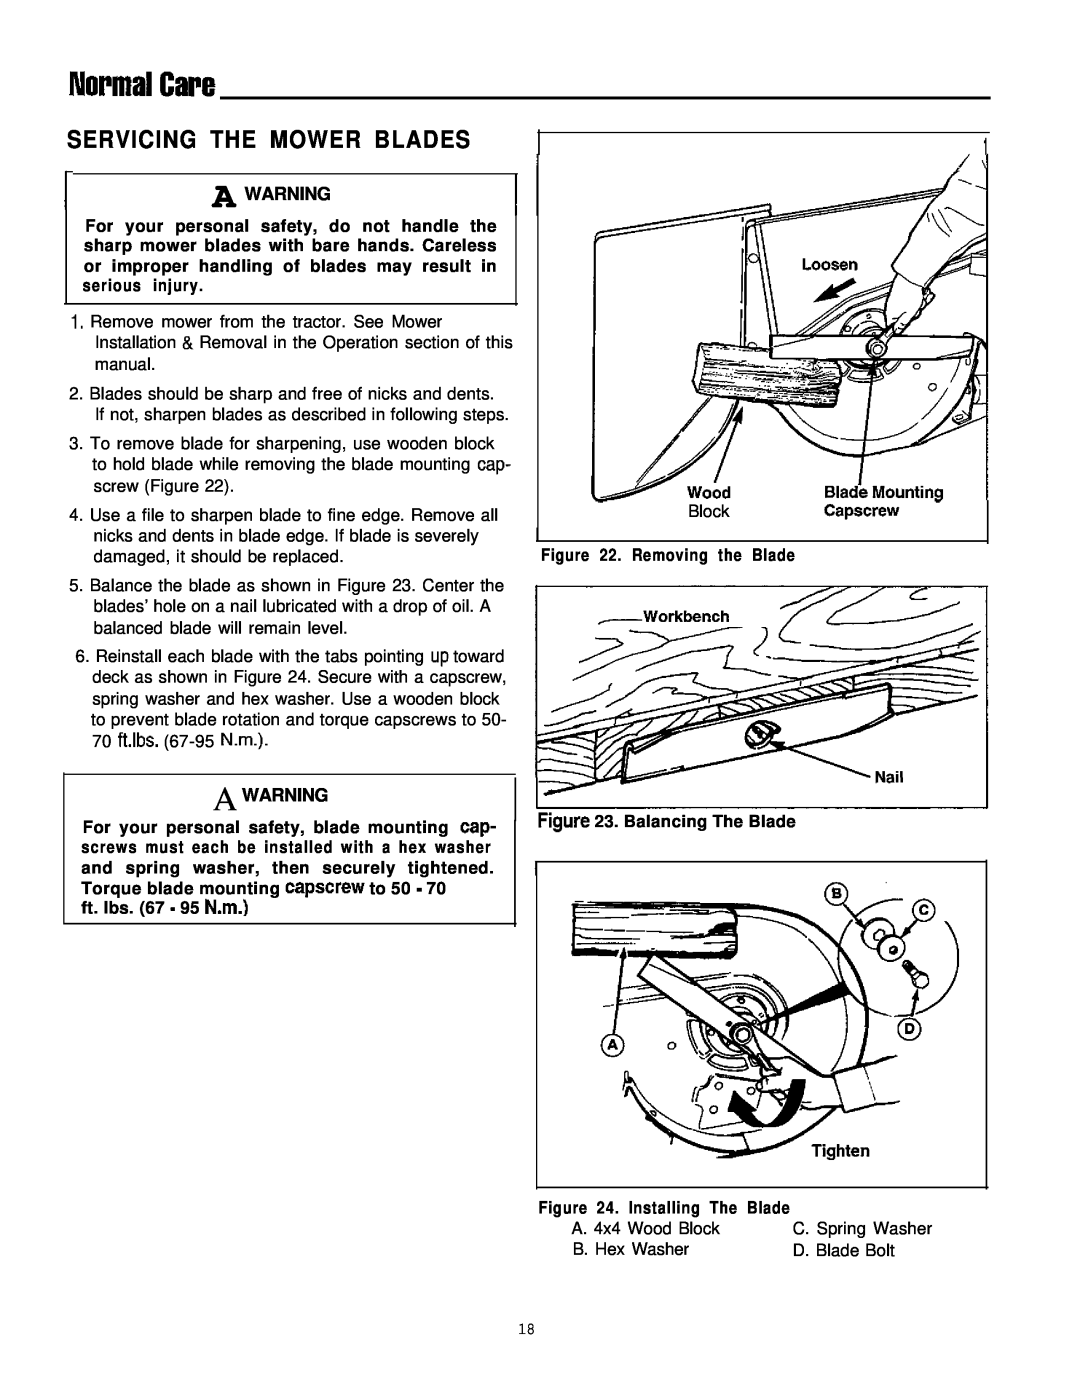 Simplicity 1693266 Servicing The Mower Blades, NormalCare, Removing the Blade, ft. Ibs. 67 - 95 N.m, Balancing The Blade 